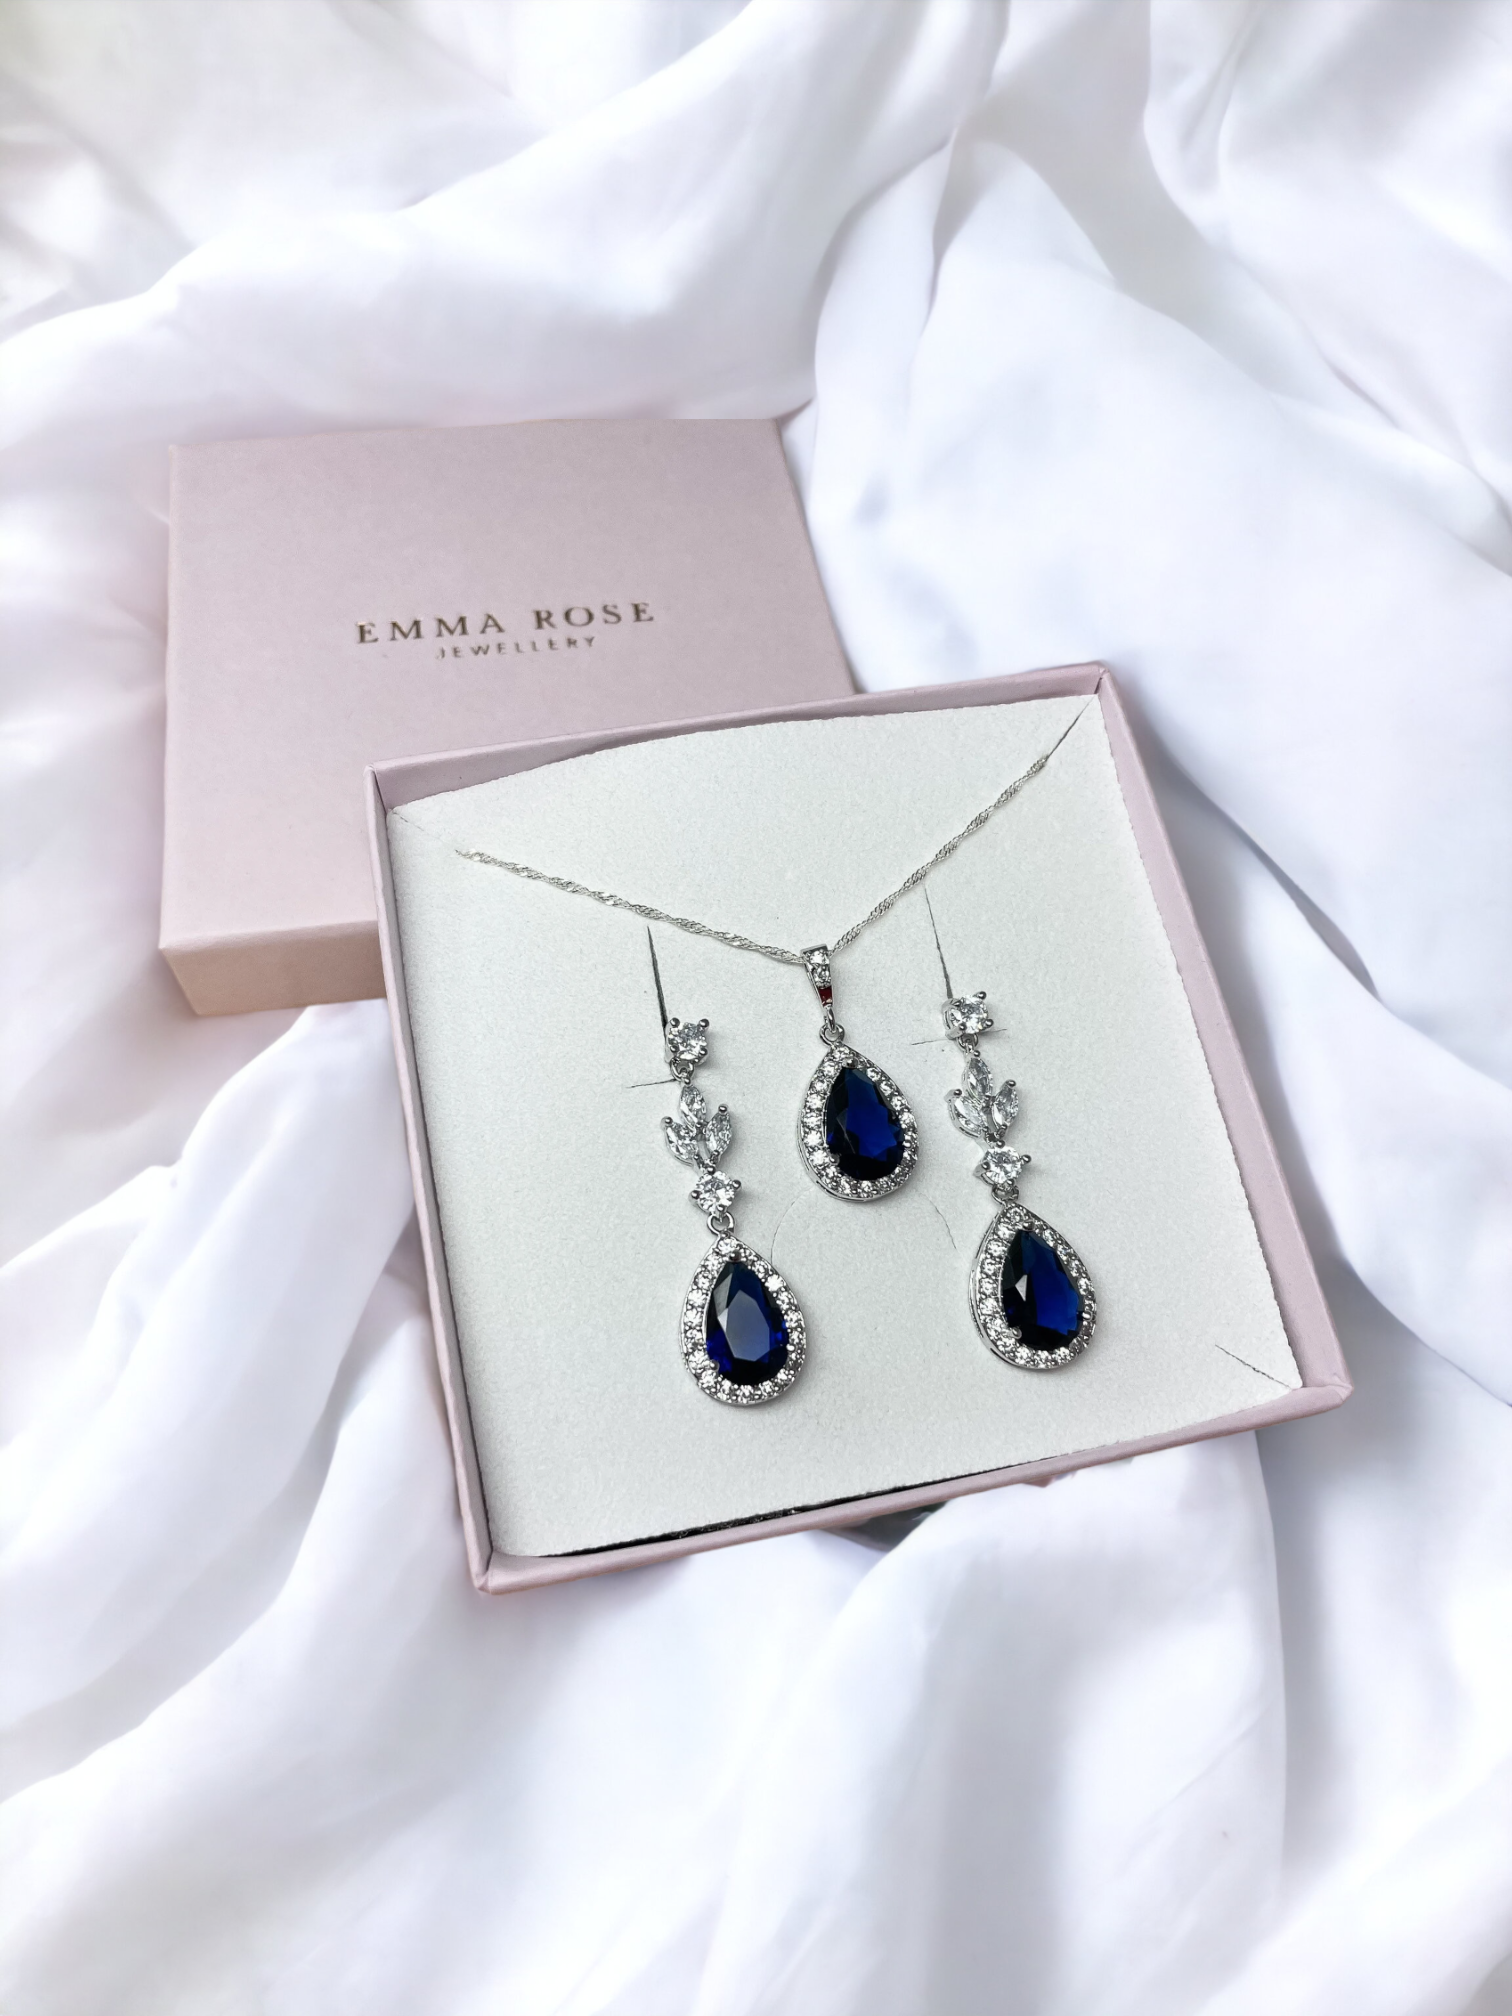 Sparkly Blue Cubic Zirconia Teardrop Necklace and Earring Set